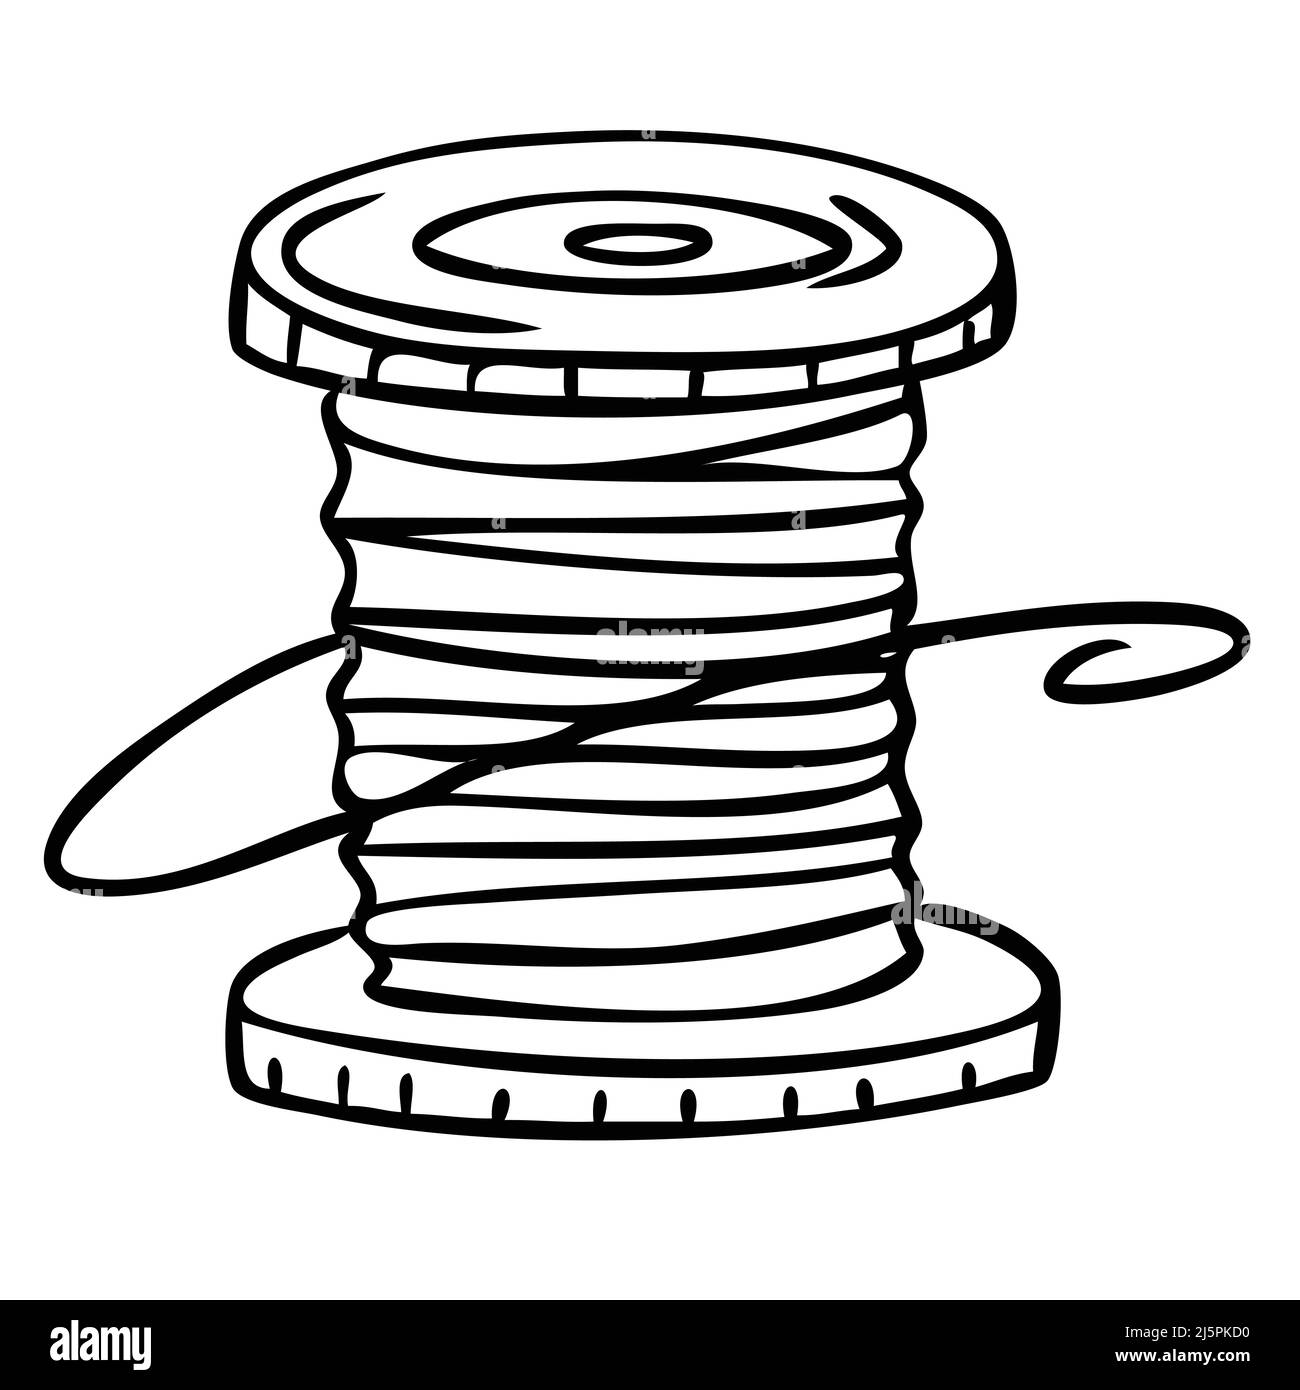 Sewing thread reels Black and White Stock Photos & Images - Alamy